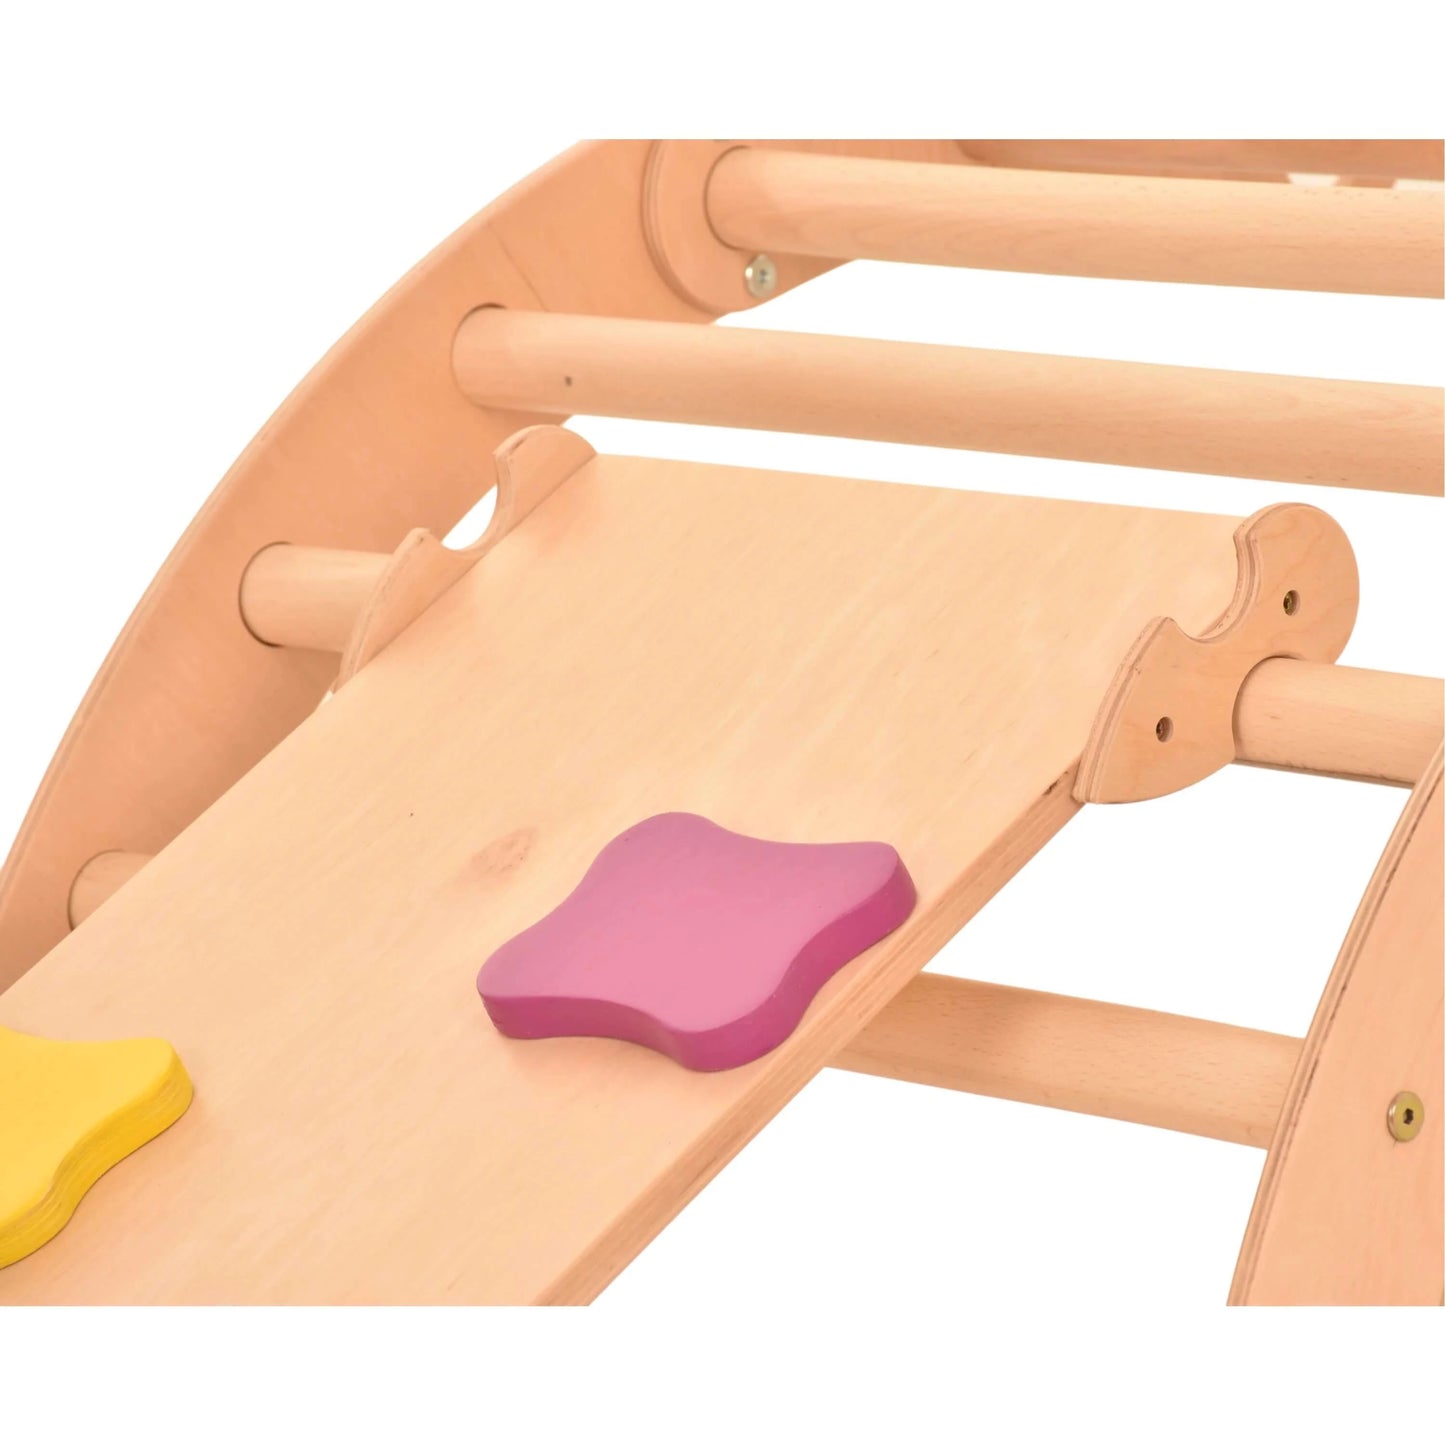 Sliding board with flower handles - accessories for the climbing triangle